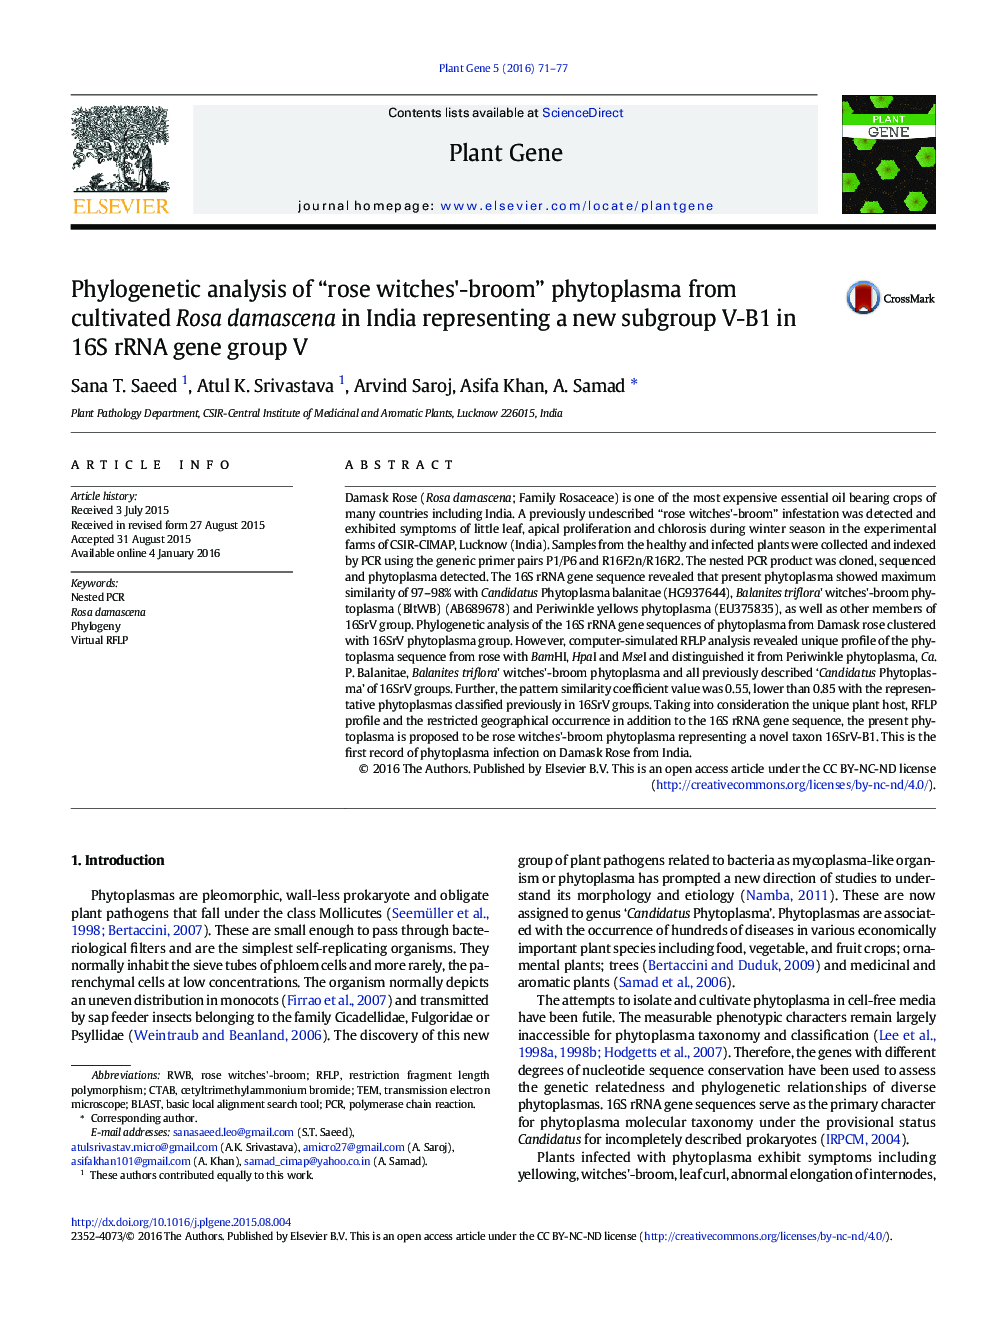 Phylogenetic analysis of “rose witches'-broom” phytoplasma from cultivated Rosa damascena in India representing a new subgroup V-B1 in 16S rRNA gene group V